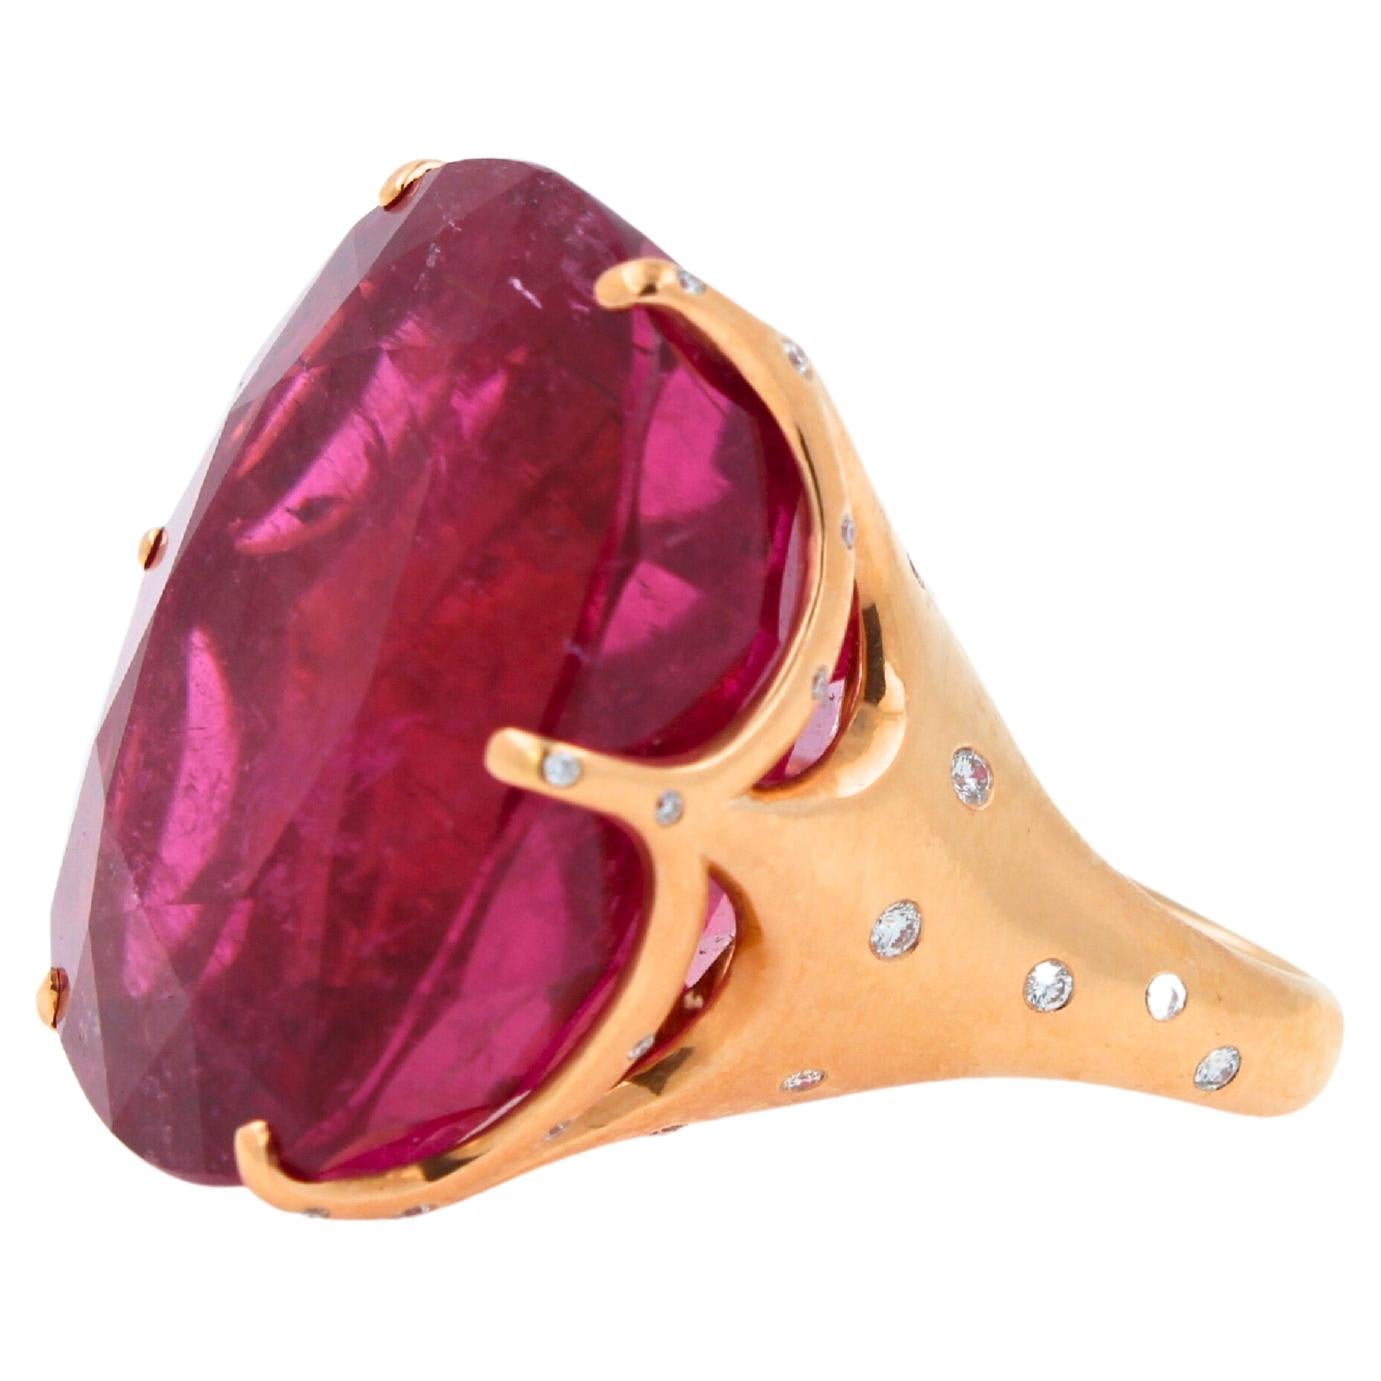 Women's or Men's Huge Unique 110 Carats Red Pink Maroon Rubellite 18k Rose Gold Diamond Ring For Sale